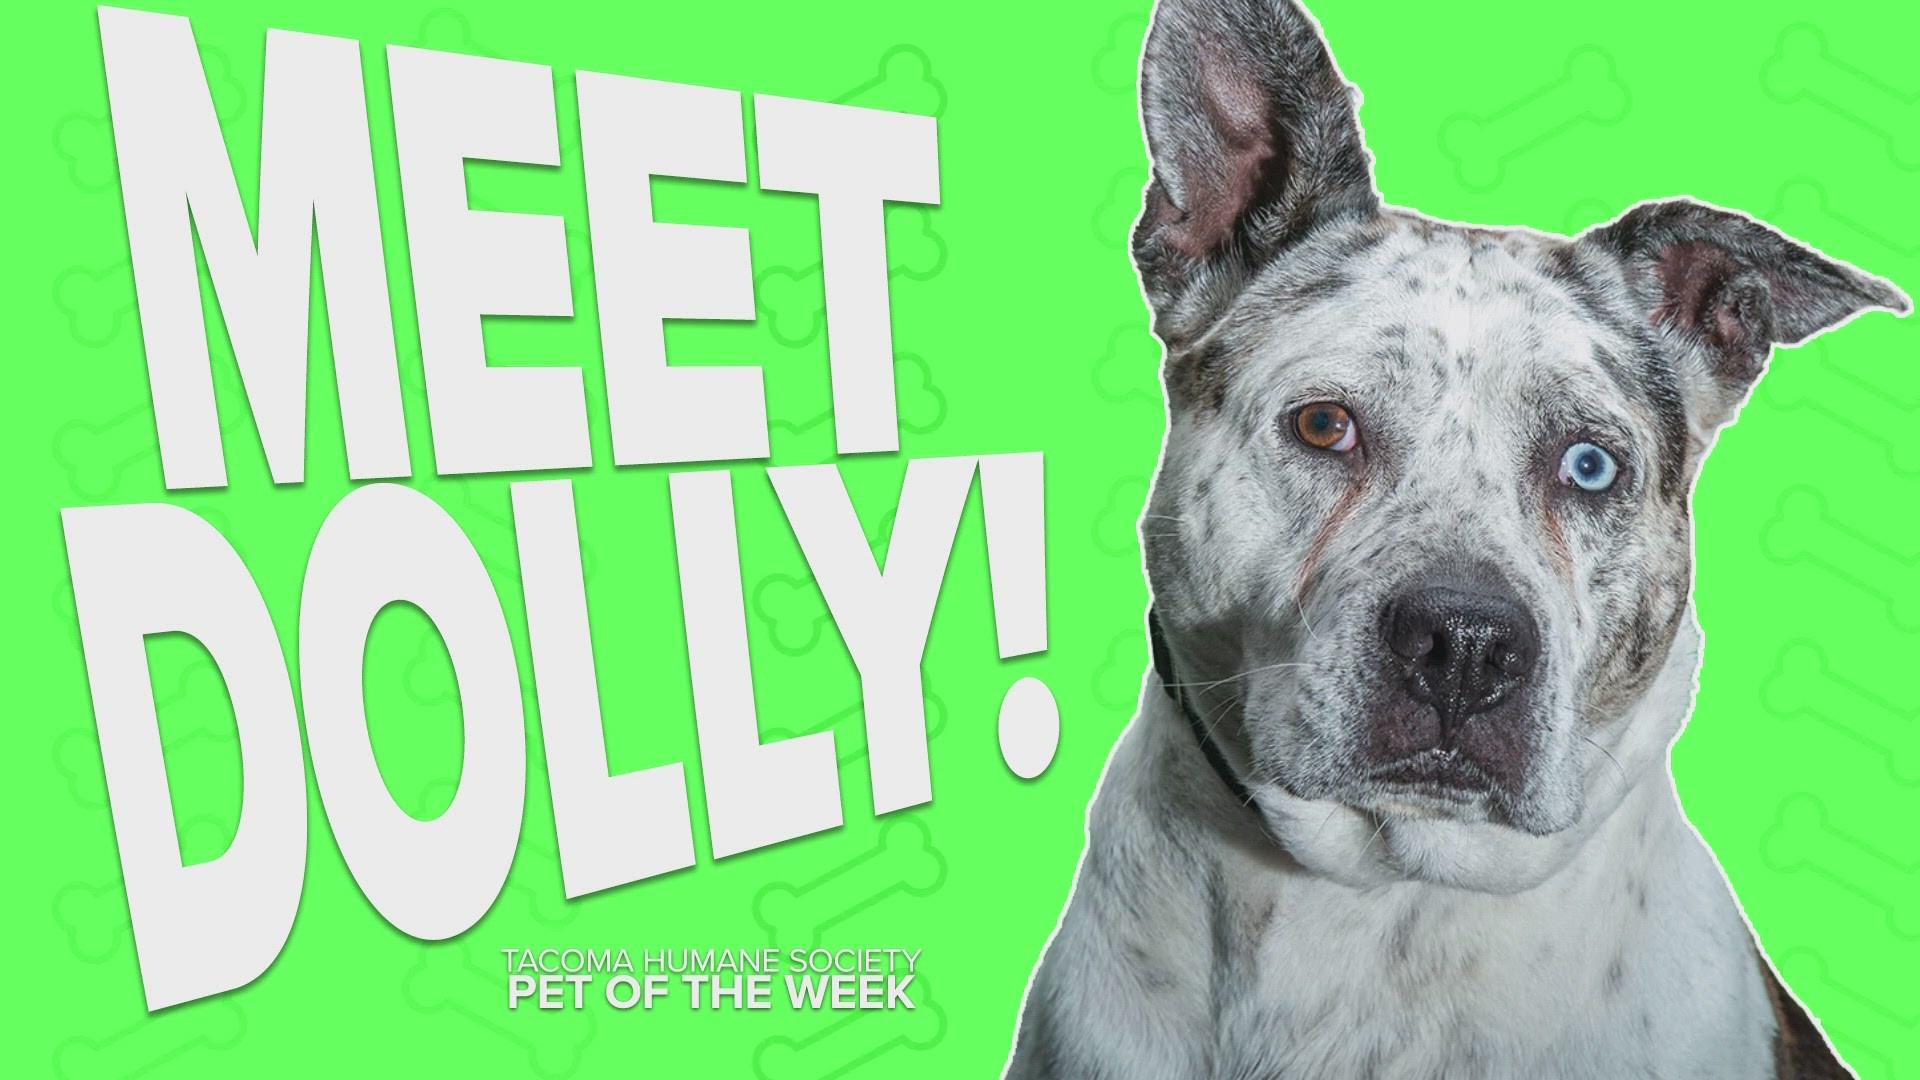 This week's adoptable pet of the week is Dolly!